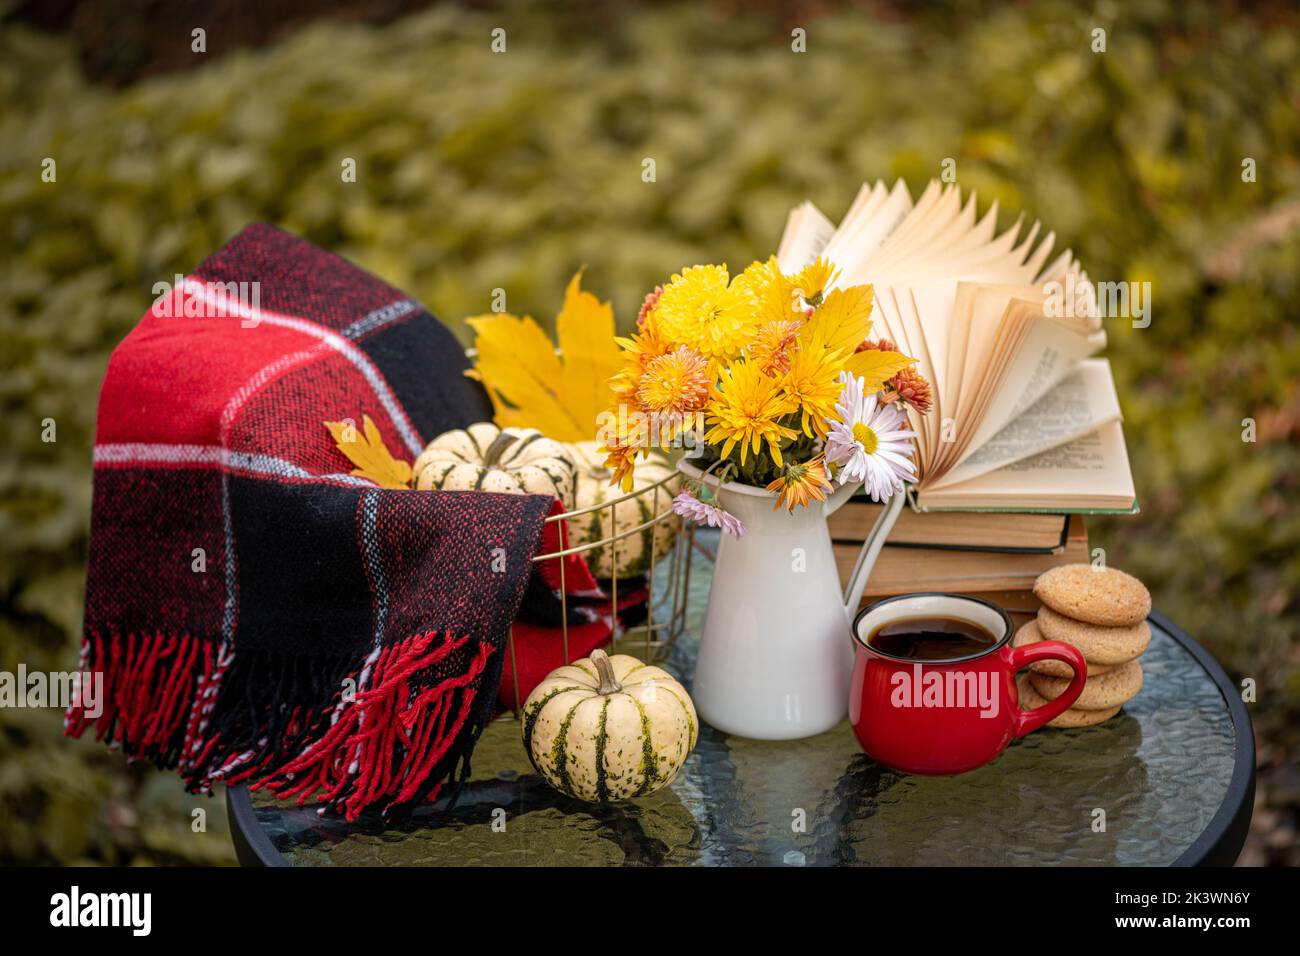 Bouquet of flowers, pumpkin, coffee cup, books on table in autumn garden. Rest in garden, reading books, breakfast, cozy in nature concept. Autumn tim Stock Photo